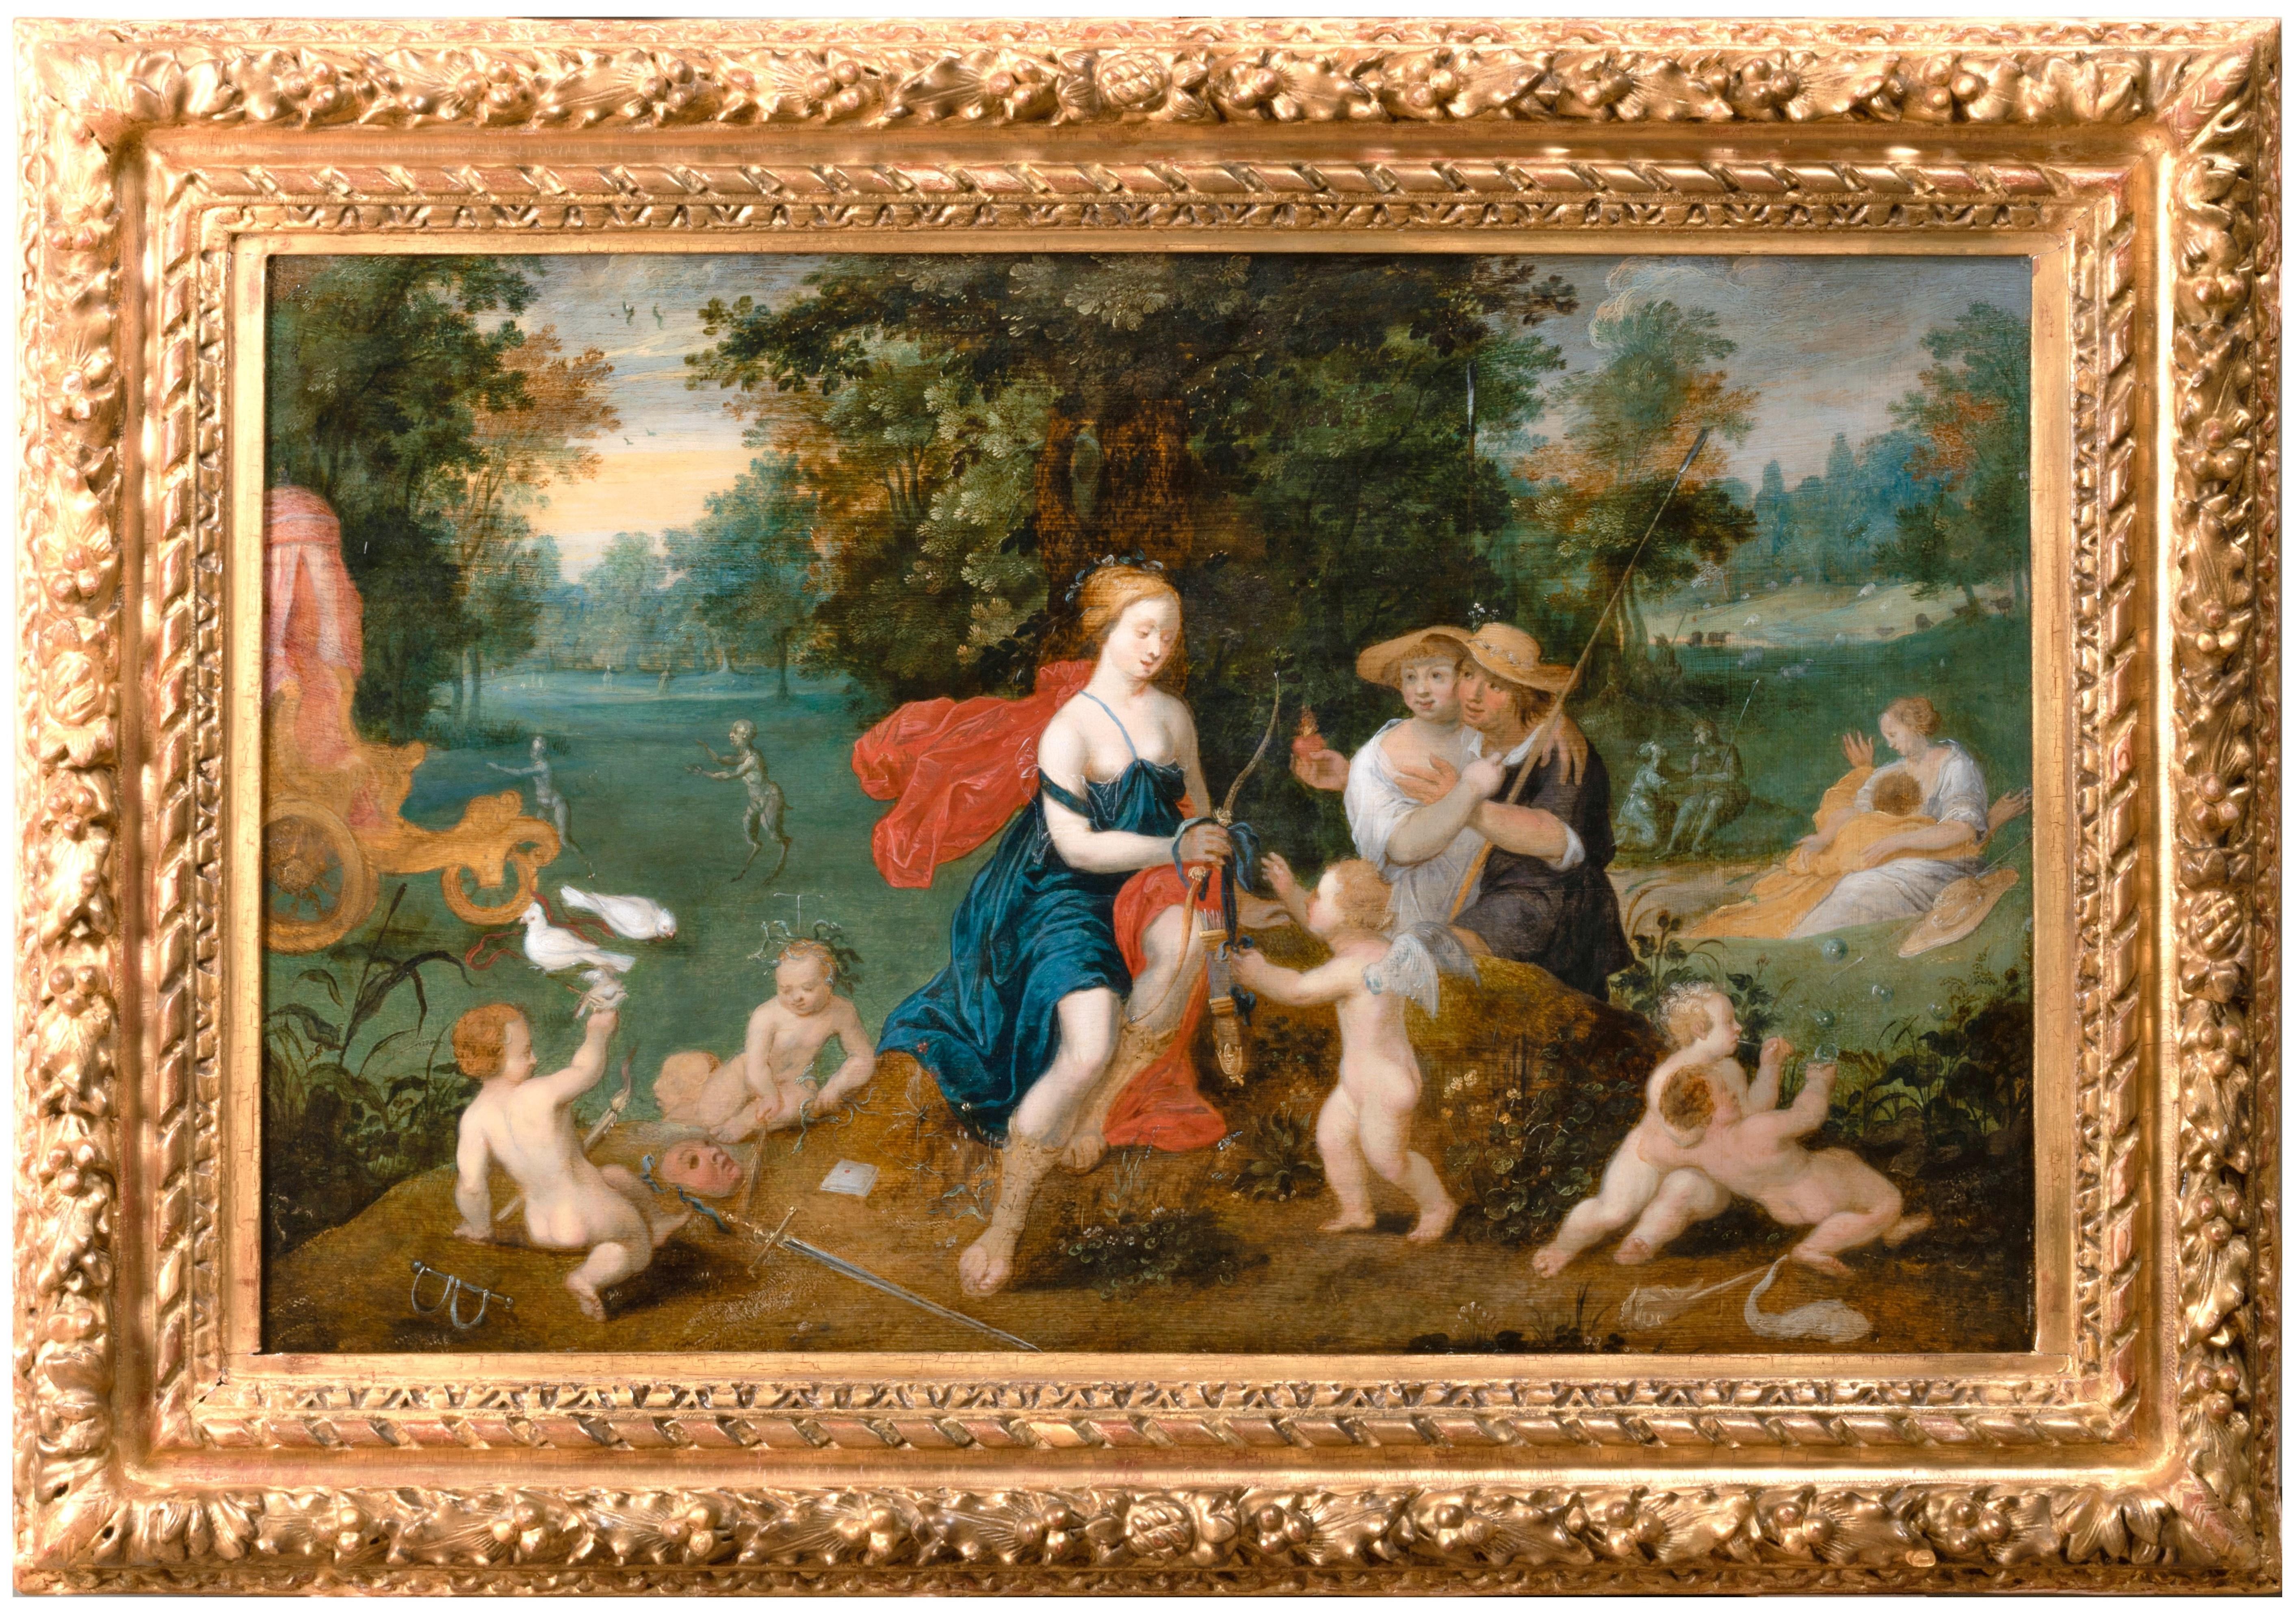 Adriaen van Stalbemt (Antwerp, 1580-1662)
Allegory of Peace and War, circa 1620-1630

Oil on oak panel: h. 49.5 cm, l. 73.2cm (19.29 x 28.74 in)
Giltwood frame with laurel leaves, Louis XIII period, 17th century
Framed dimensions: h. 64, l. 92cm